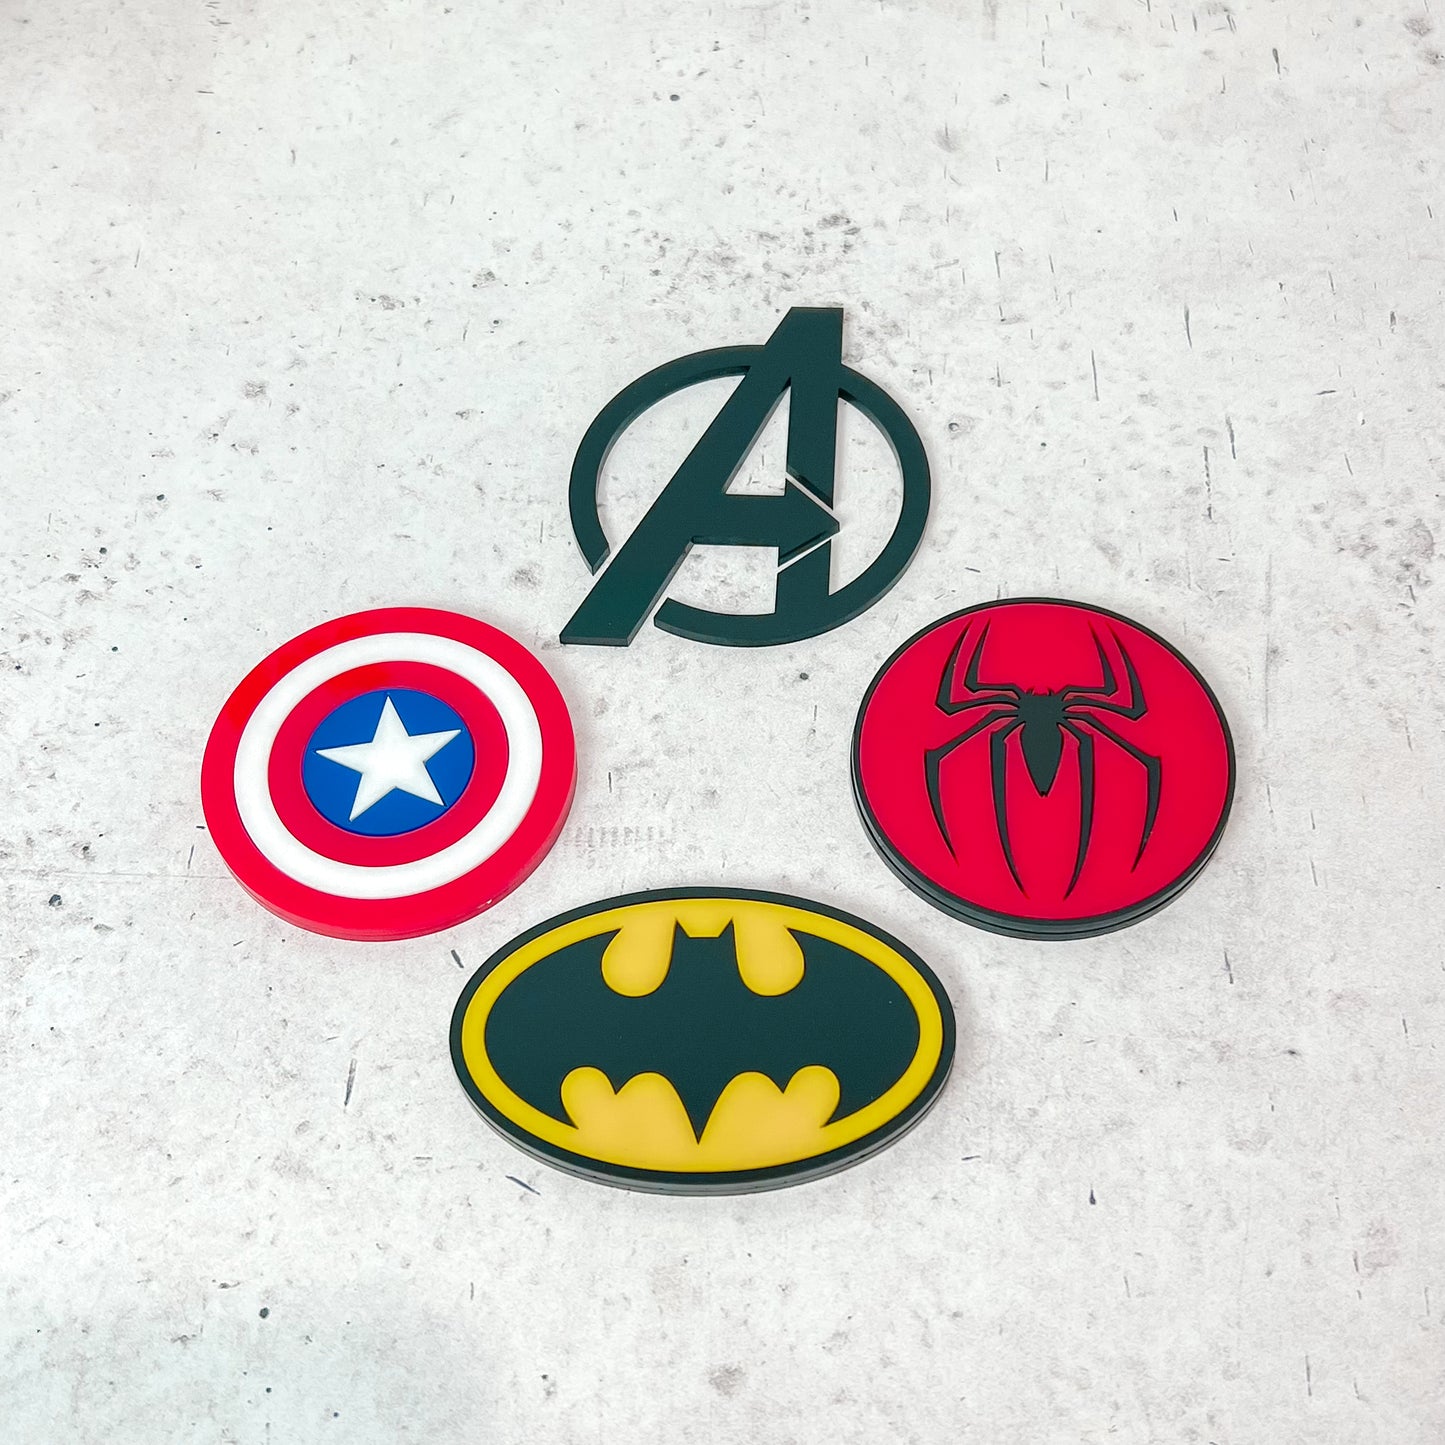 Superhero Cake Toppers Collection